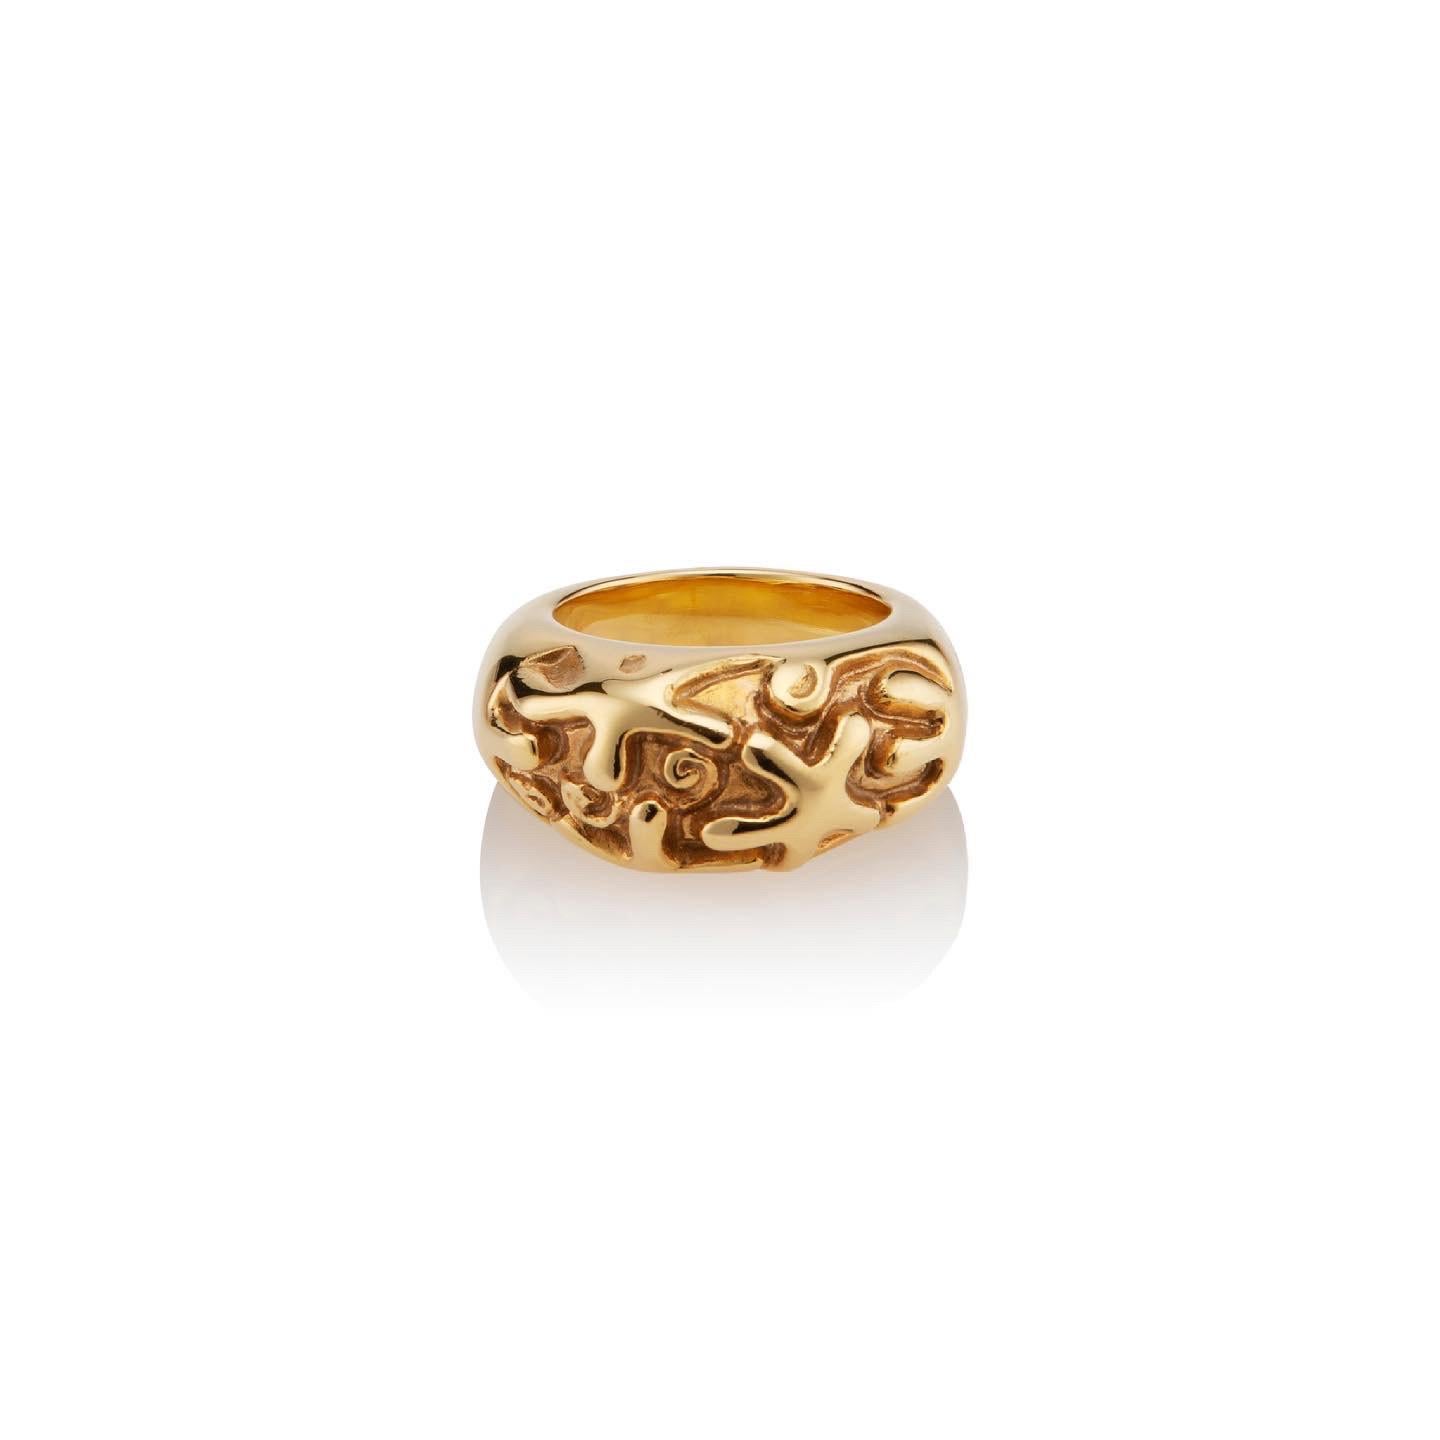 22 Karat Gold Vermeil Diaspora Starfish Ring by Chee Lee Designs

This Dome-shaped ring is embossed with a starfish, another celestial symbol that represents infinite divine love, and is a truly elegant design in 22 Karat gold vermeil.

Size 3- Ring